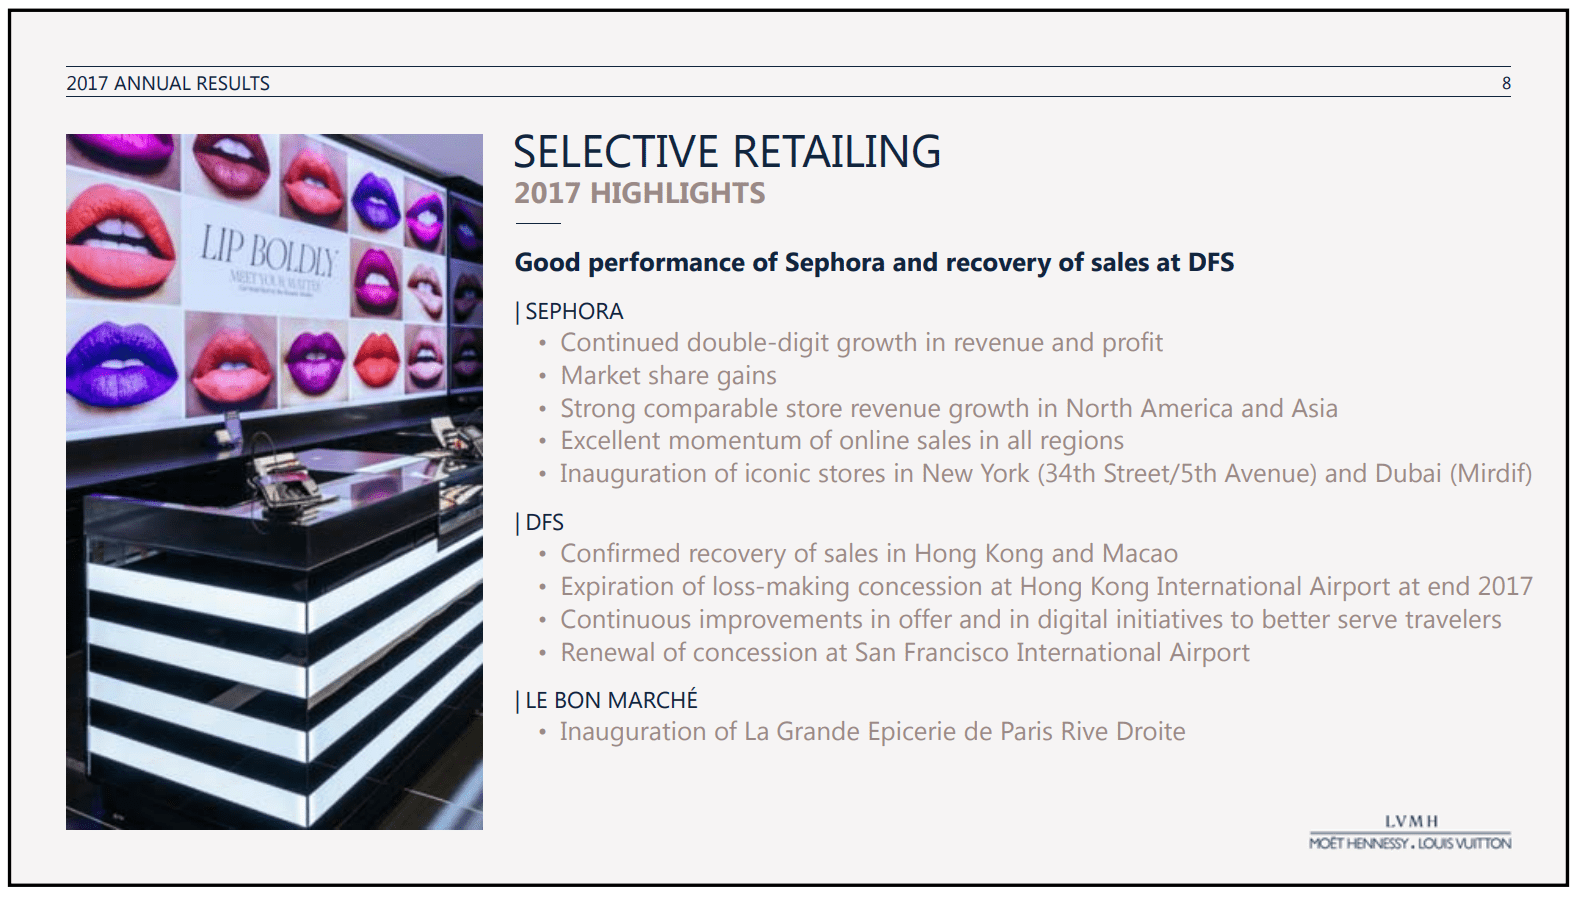 Sephora's 2017 annual report on good performance and recovery from sales at DFS